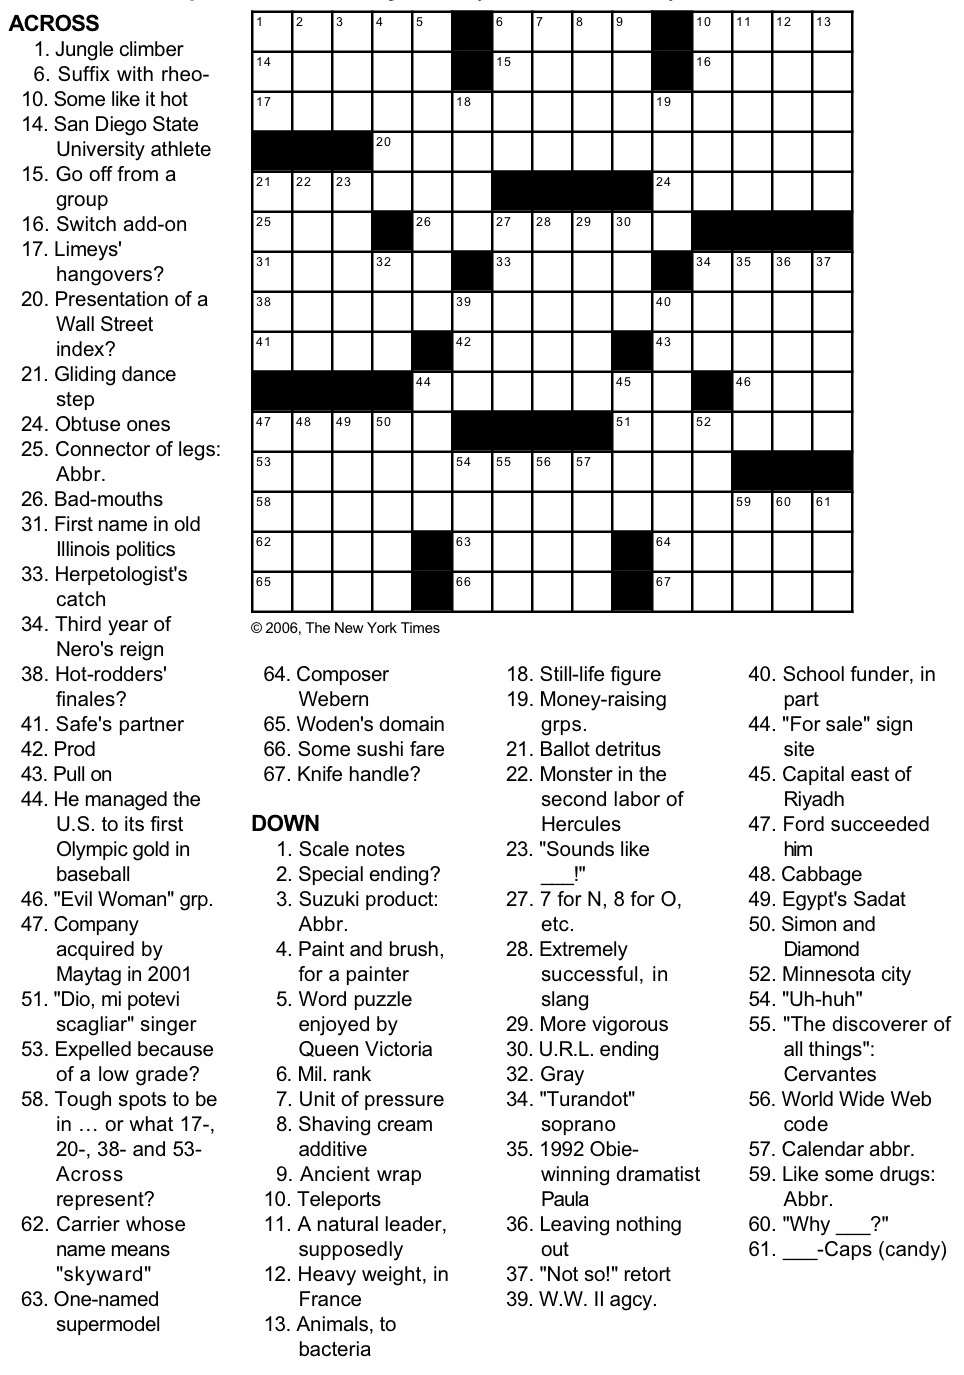 New York Times Crossword Puzzle by George Barany and Michael Shteyman